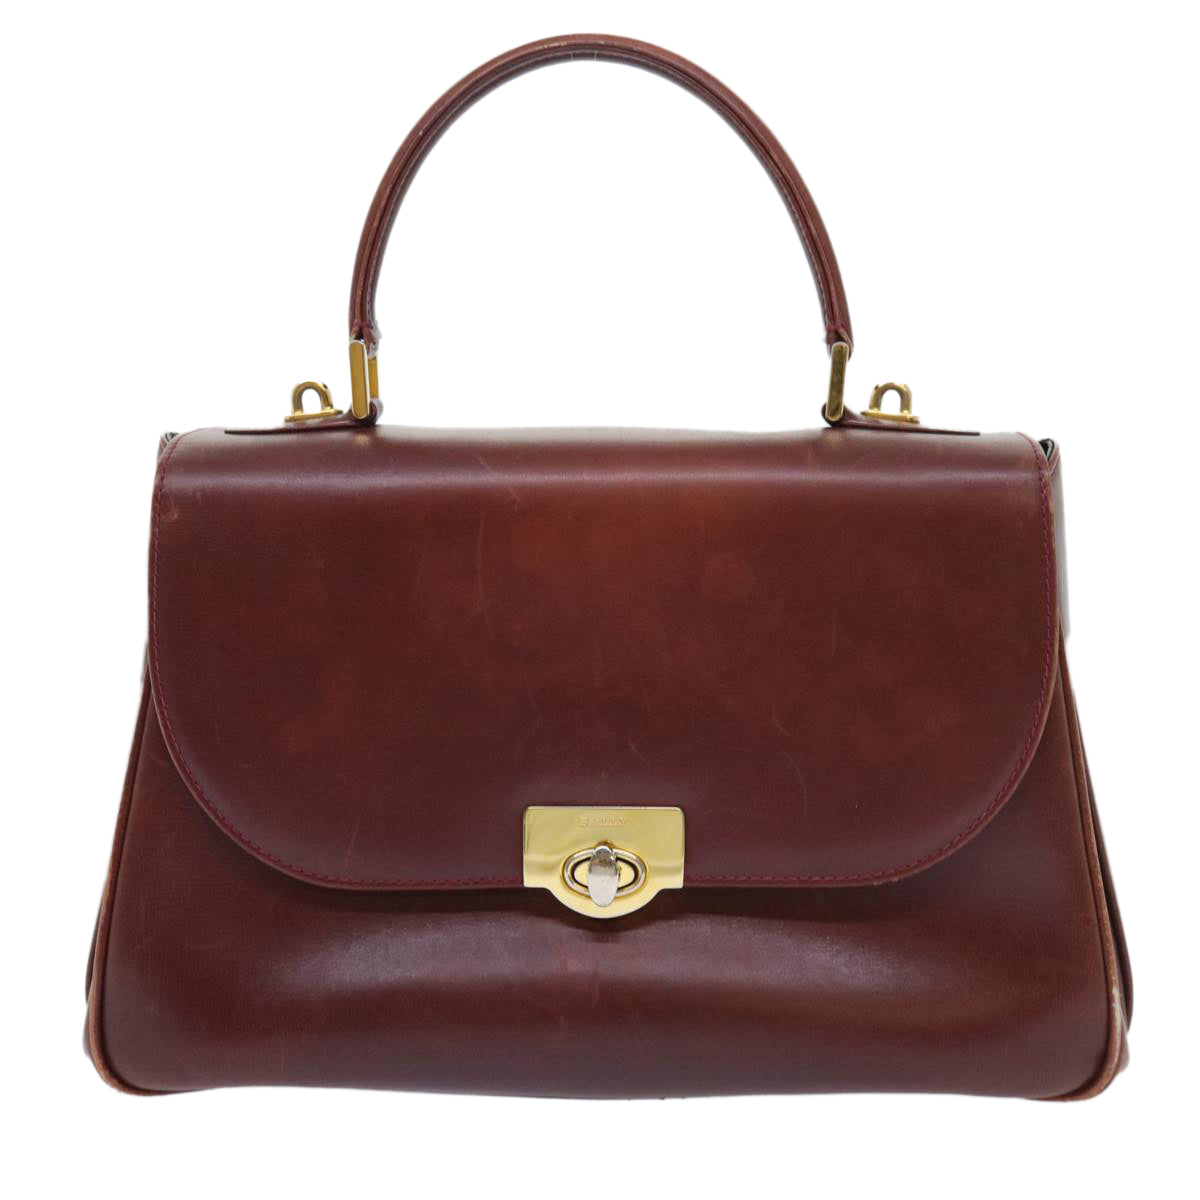 BALLY Hand Bag Leather Brown Auth yb293 - 0